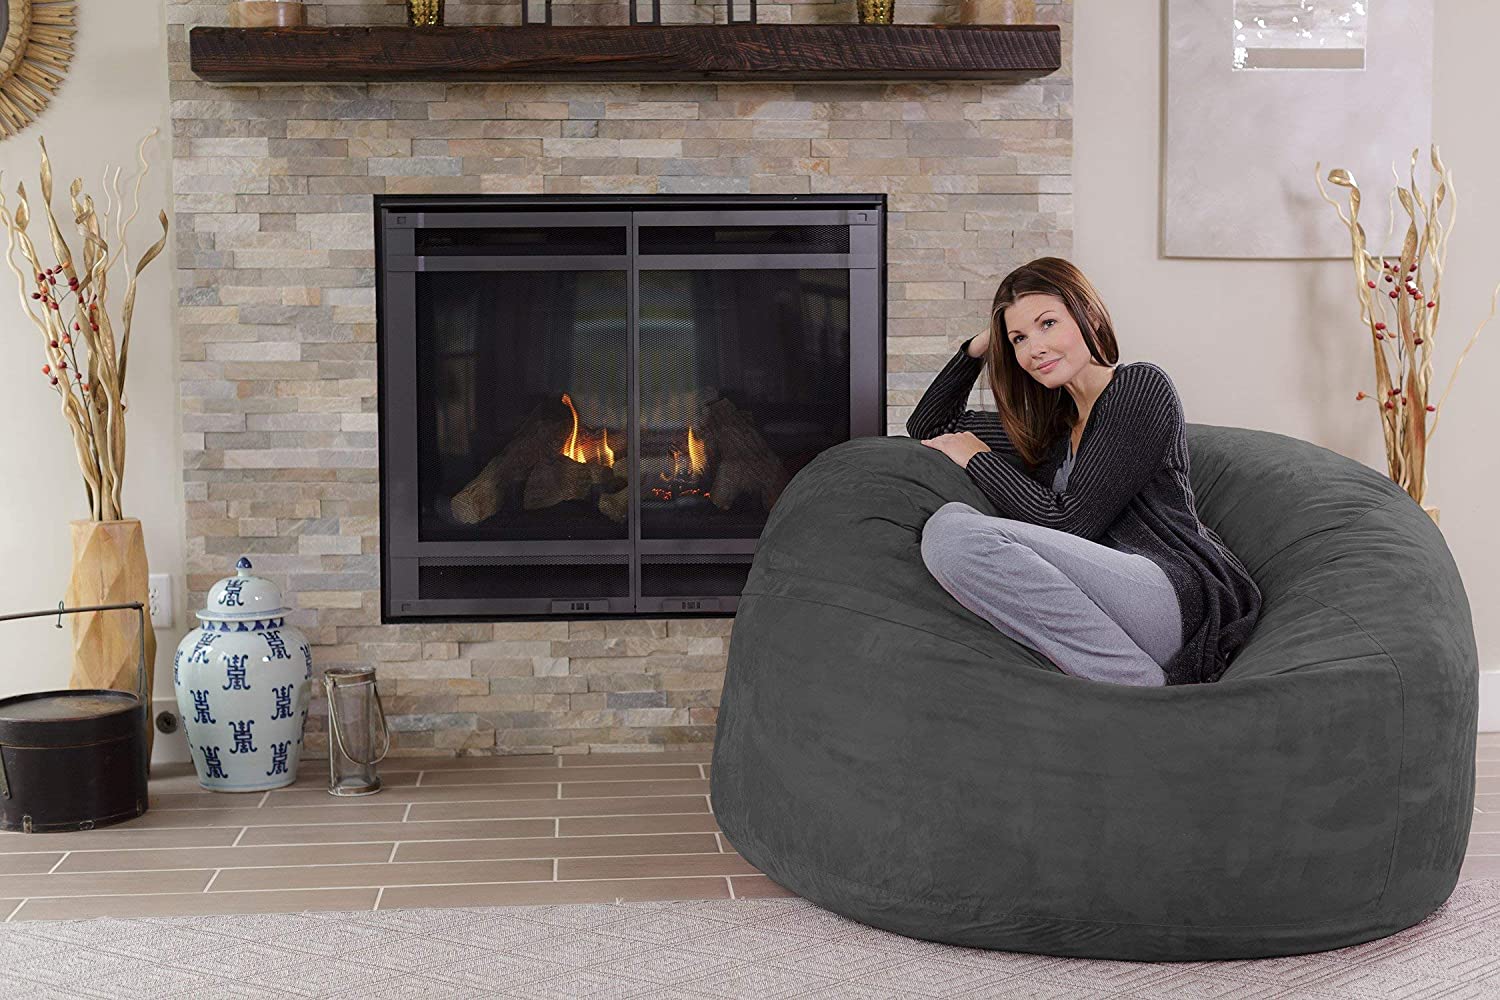 Huge Bed Europes biggest beanbag Sofa for Kids and Adults Gigantic Bean Bag Chair in Black Memory Foam Filling and Machine Washable Cover- Comfortable Cozy Lounge Sack to Chill 